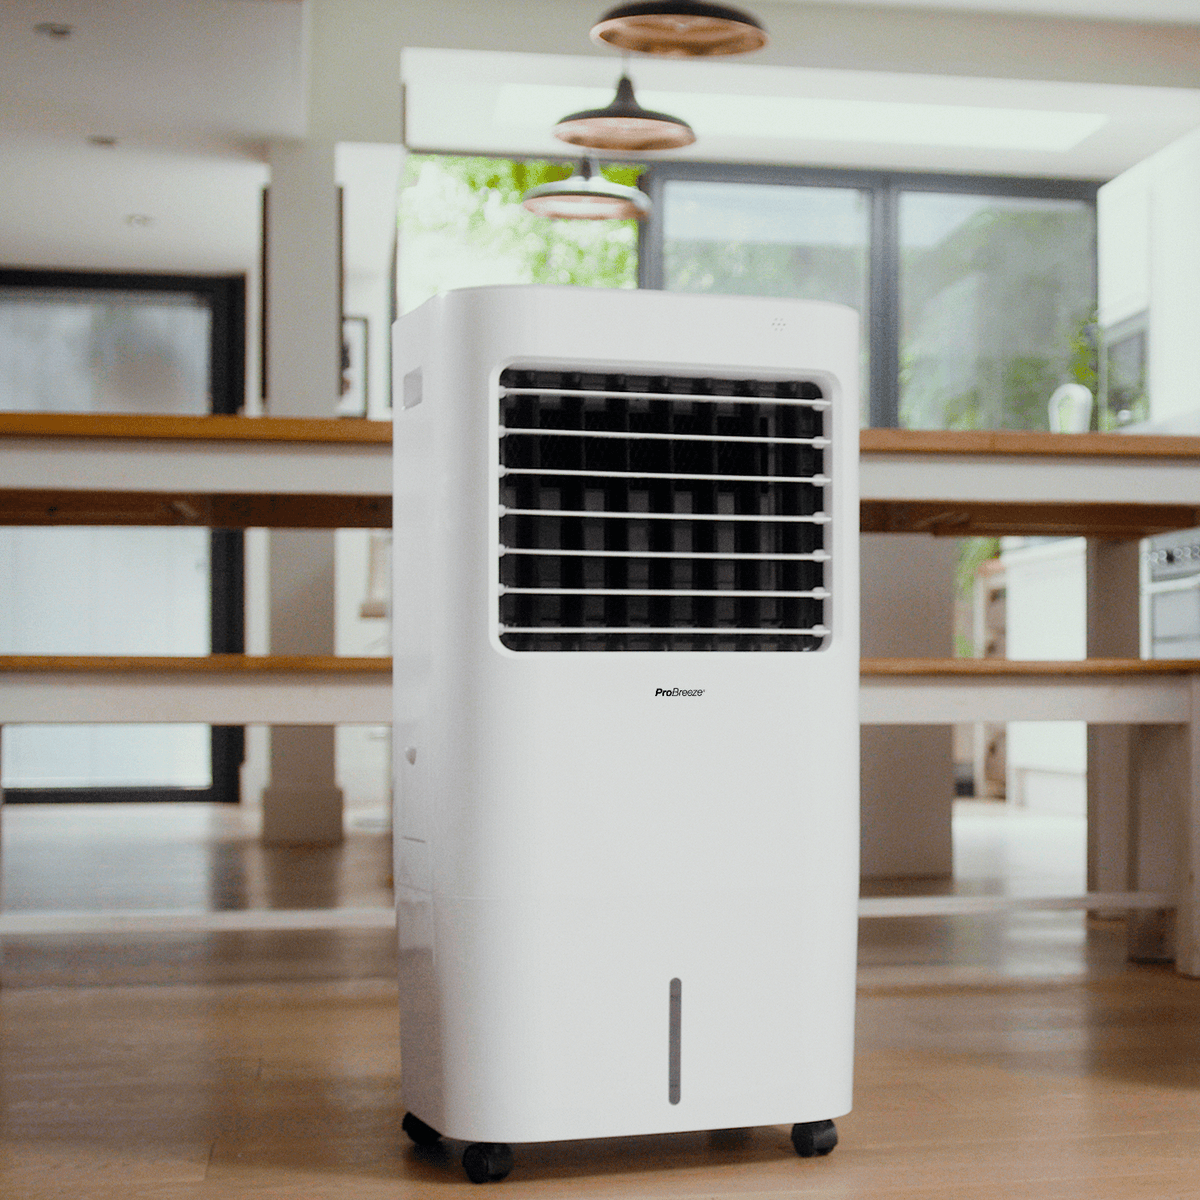 10L Portable Air Cooler with Advanced Cooling Technology - 4 Operational Modes